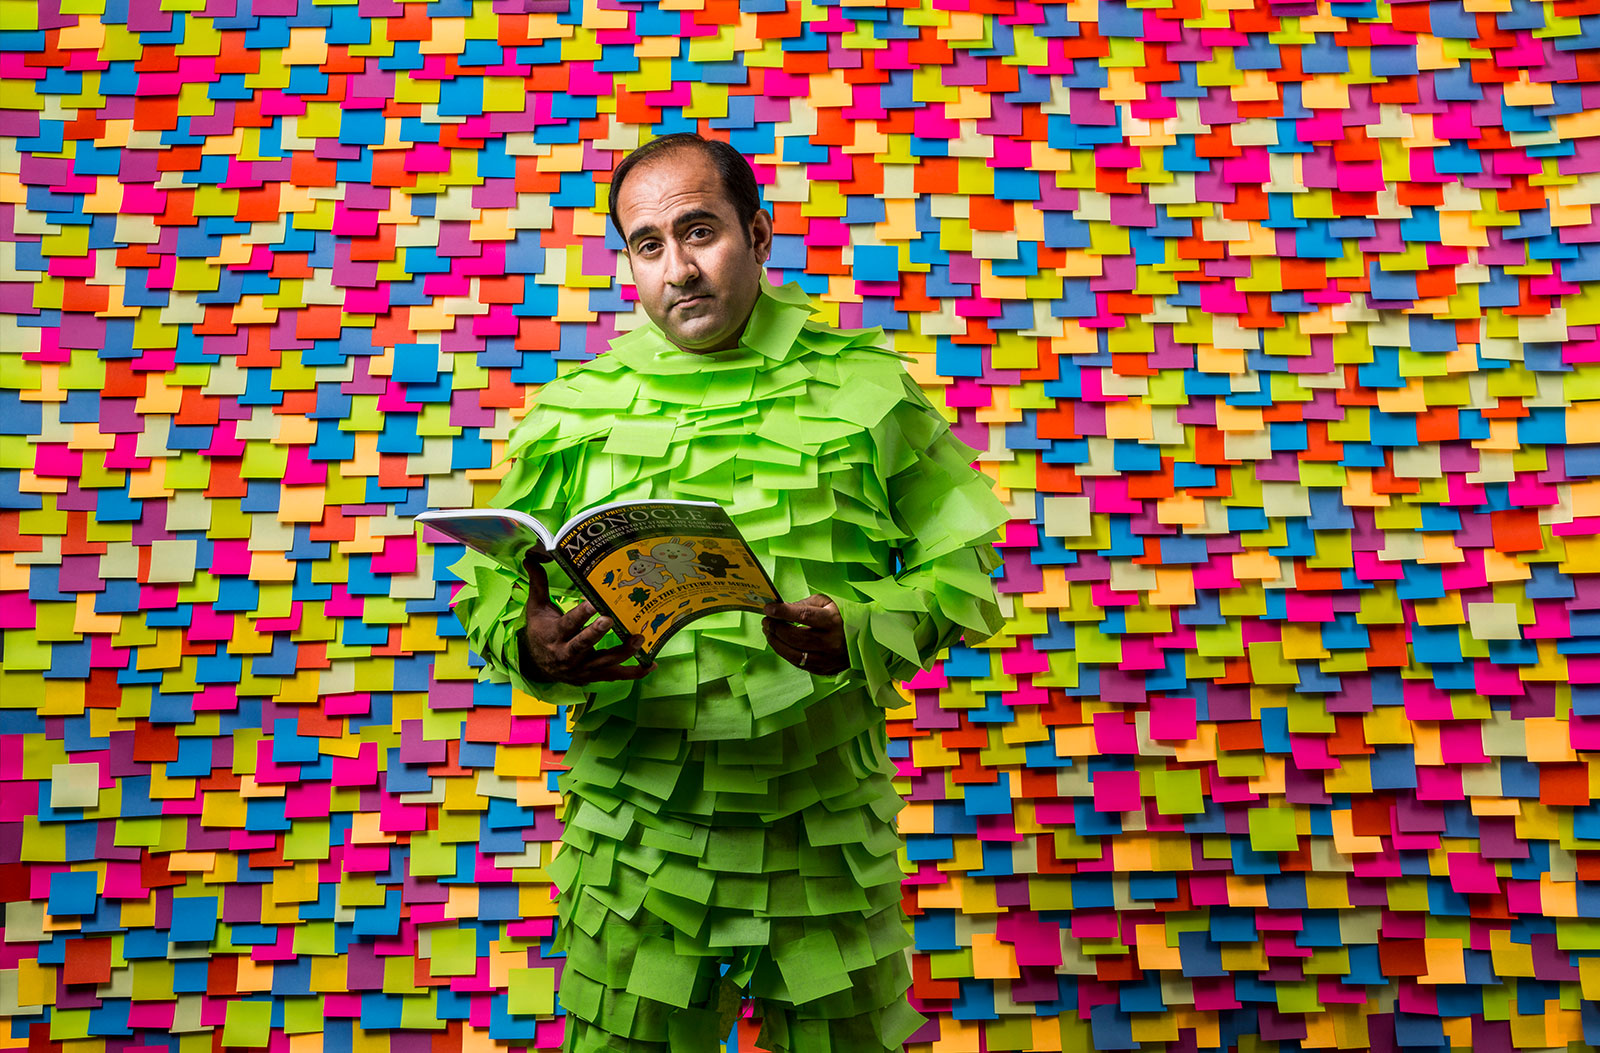 Rohit reading a magazine in front of post-it notes.